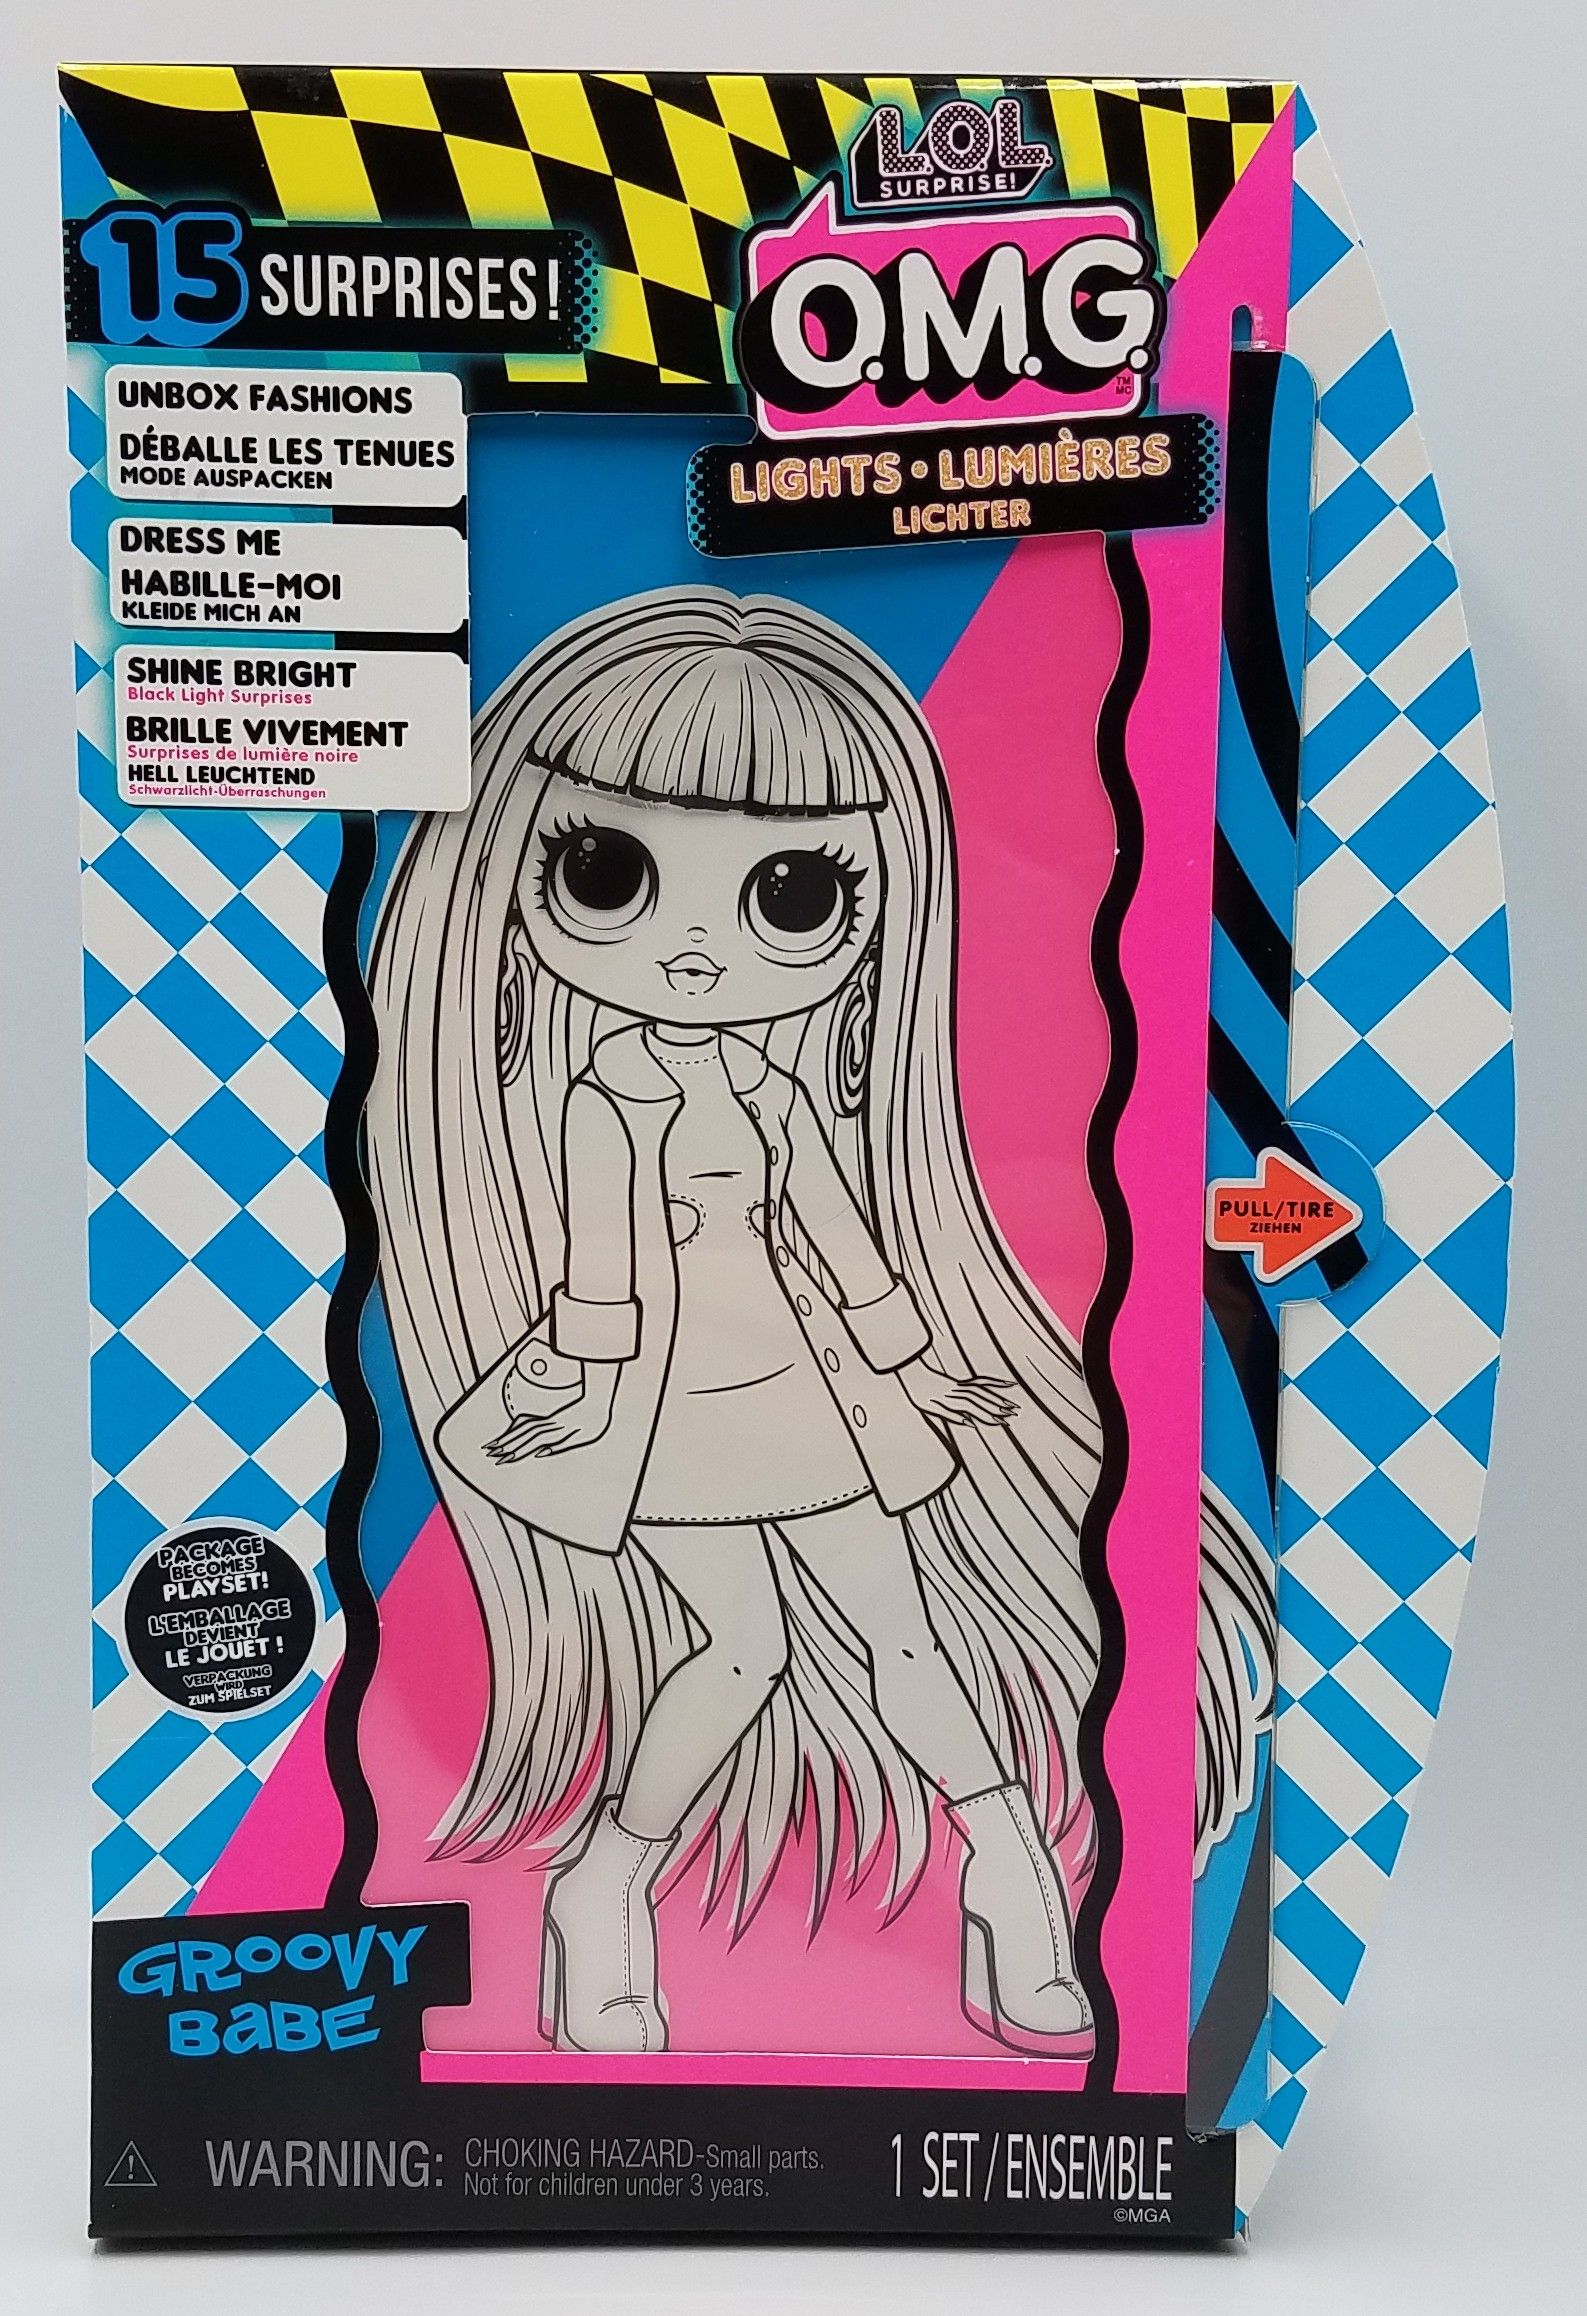 LOL Surprise OMG Groovy Babe LIGHTS Fashion Doll With 15 Surprises.